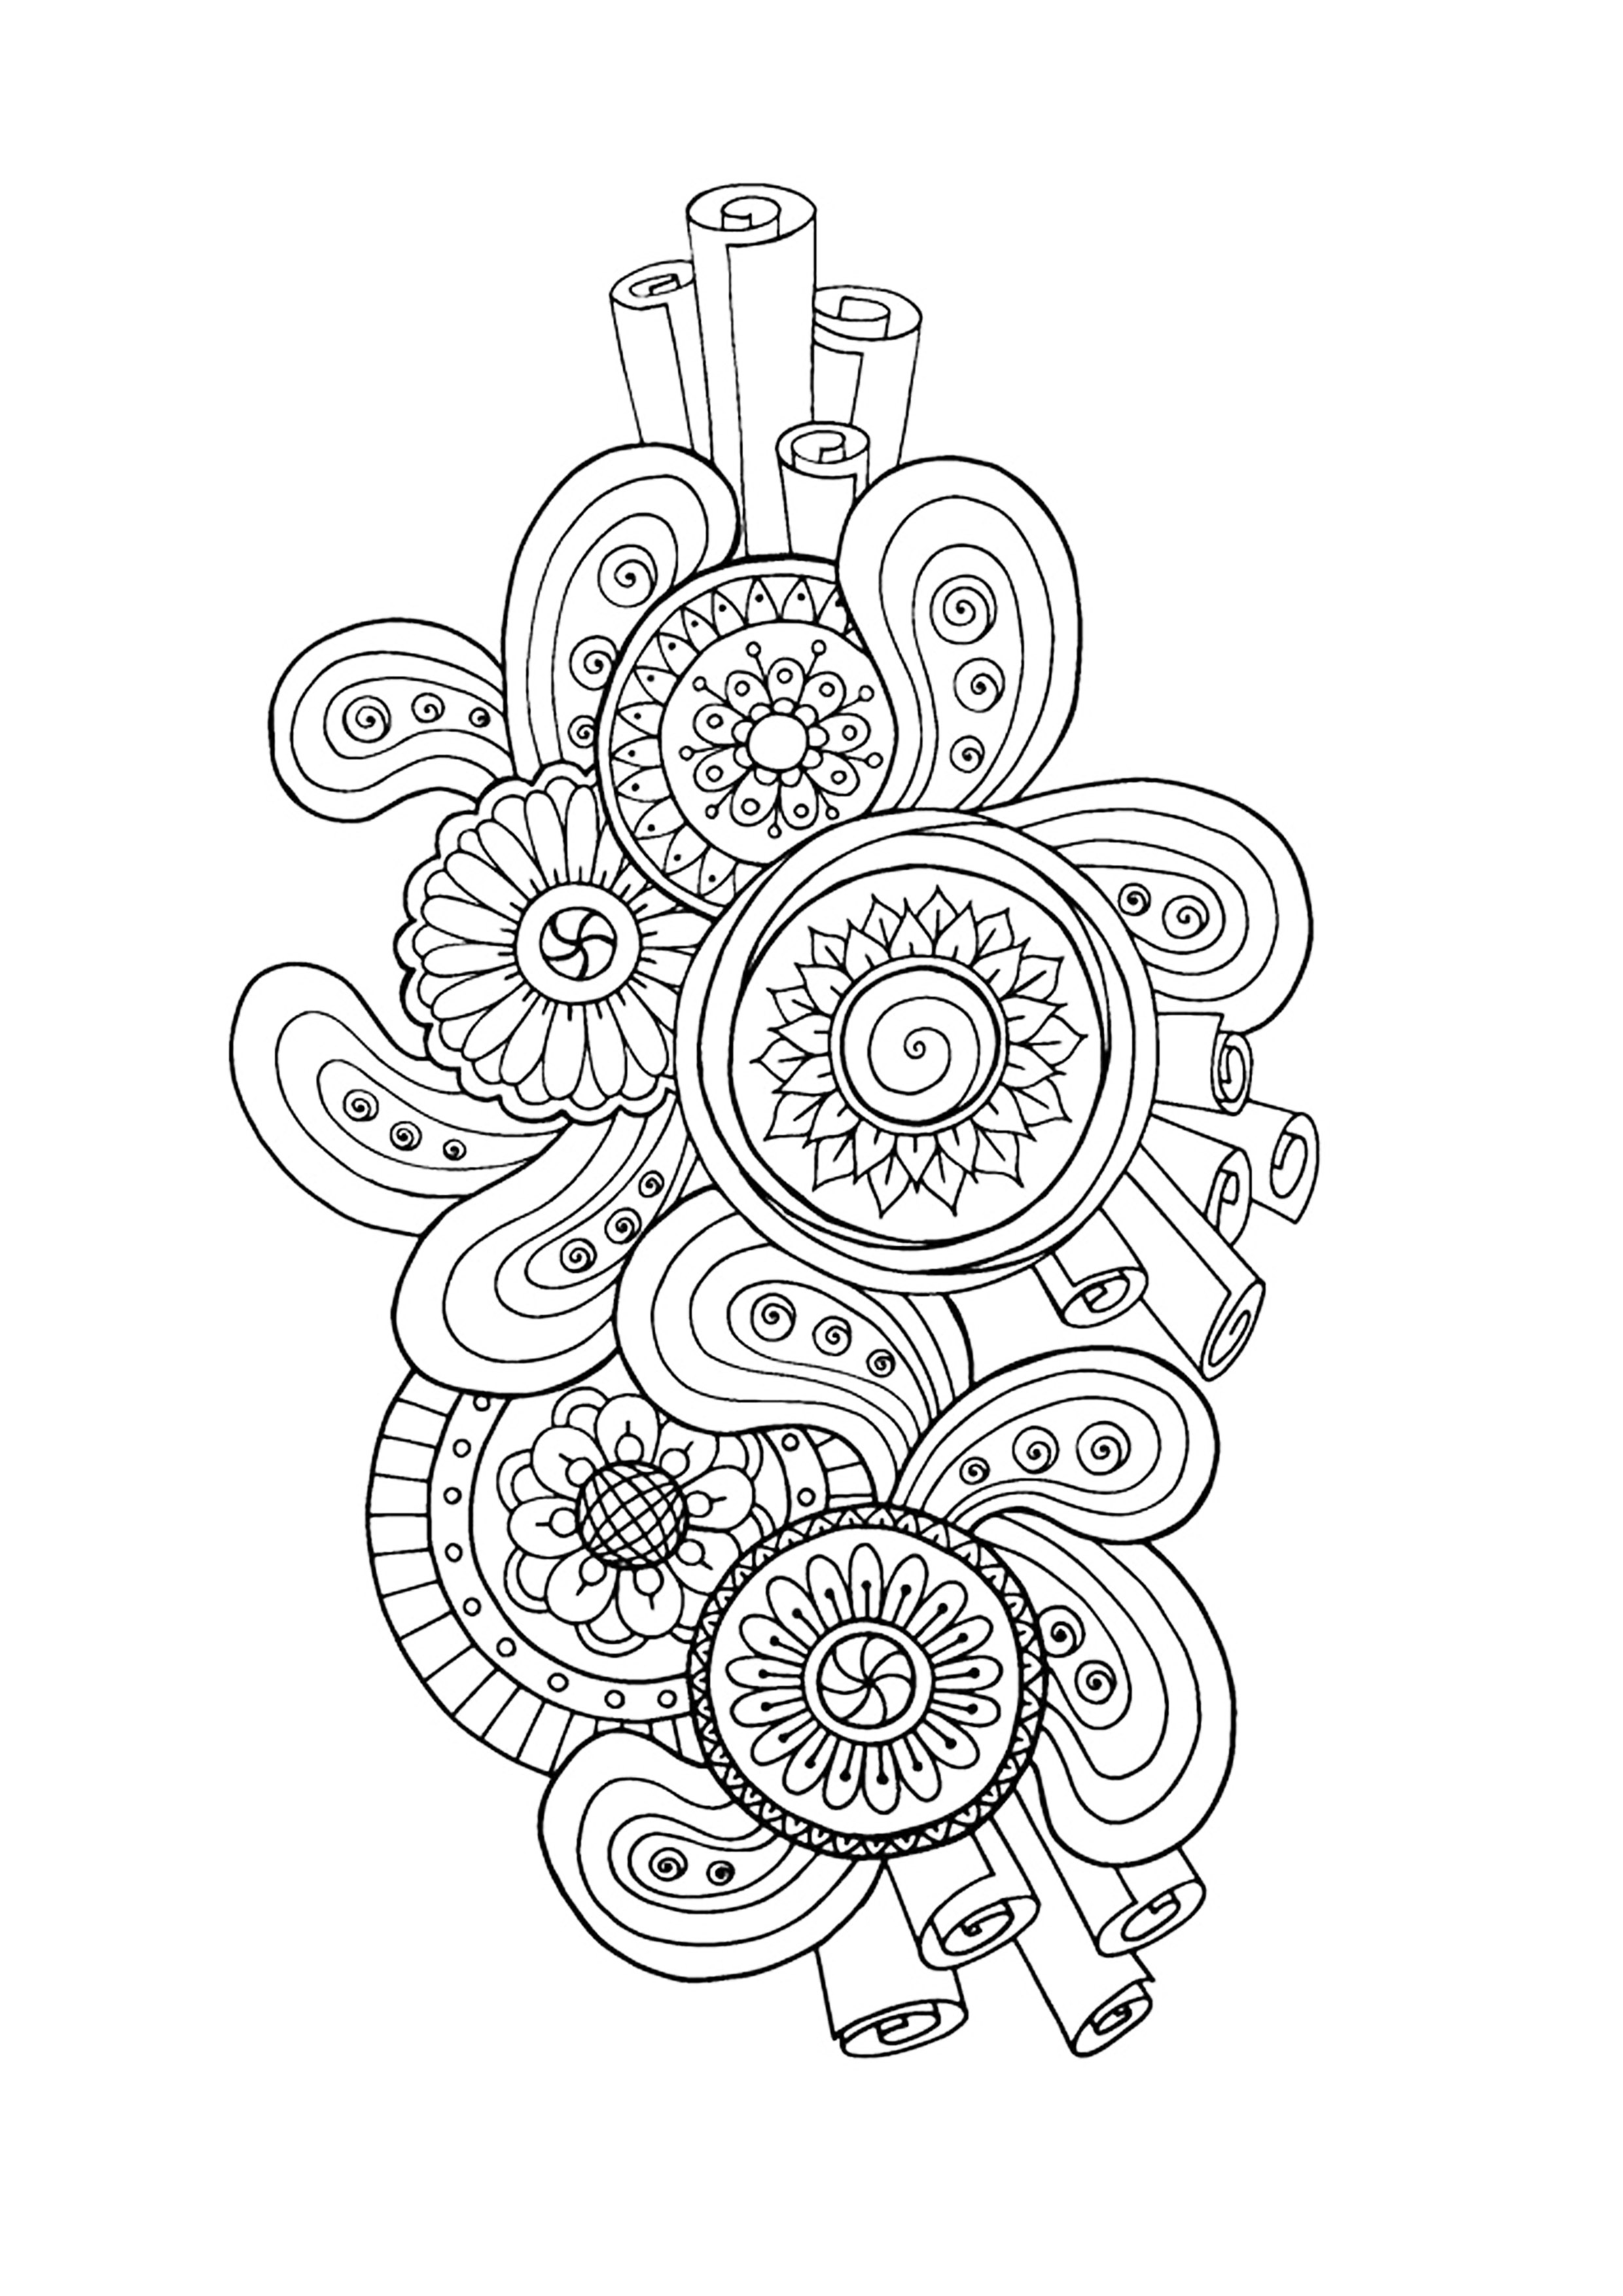 Download Zen antistress abstract pattern inspired - Anti stress Adult Coloring Pages